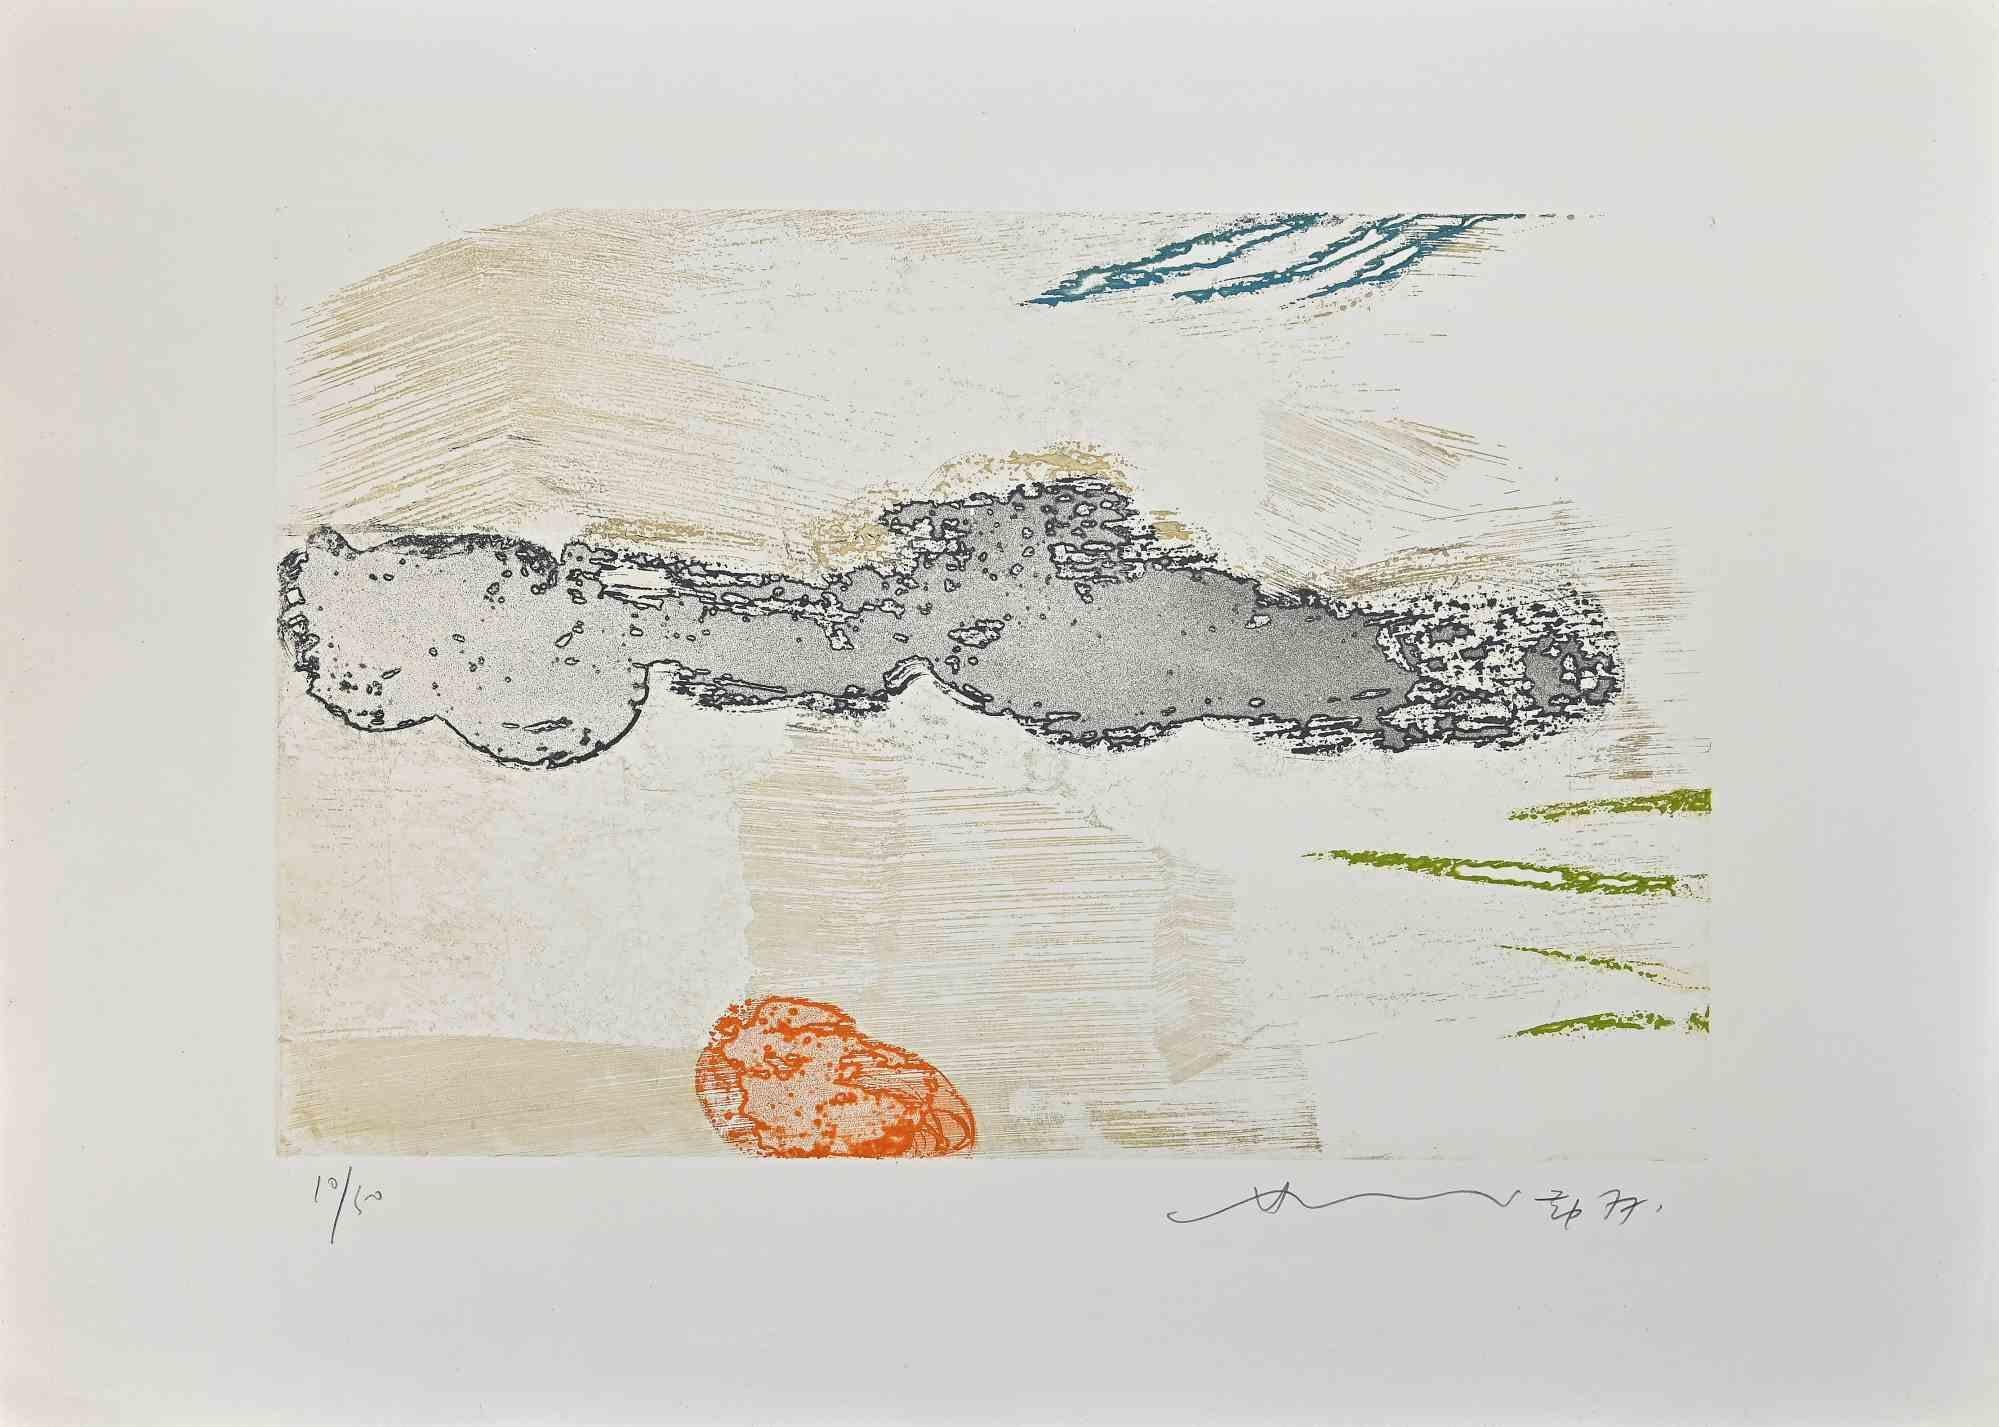 Abstract composition is a colored etching realized by  Hsiao Chin in 1977.

The artwork is hand-signed and dated in pencil on the lower right.

Numbered on the lower left. Edition of 50 copies.

Edited by La Nuova Foglio, Macerata, Italy.

Good